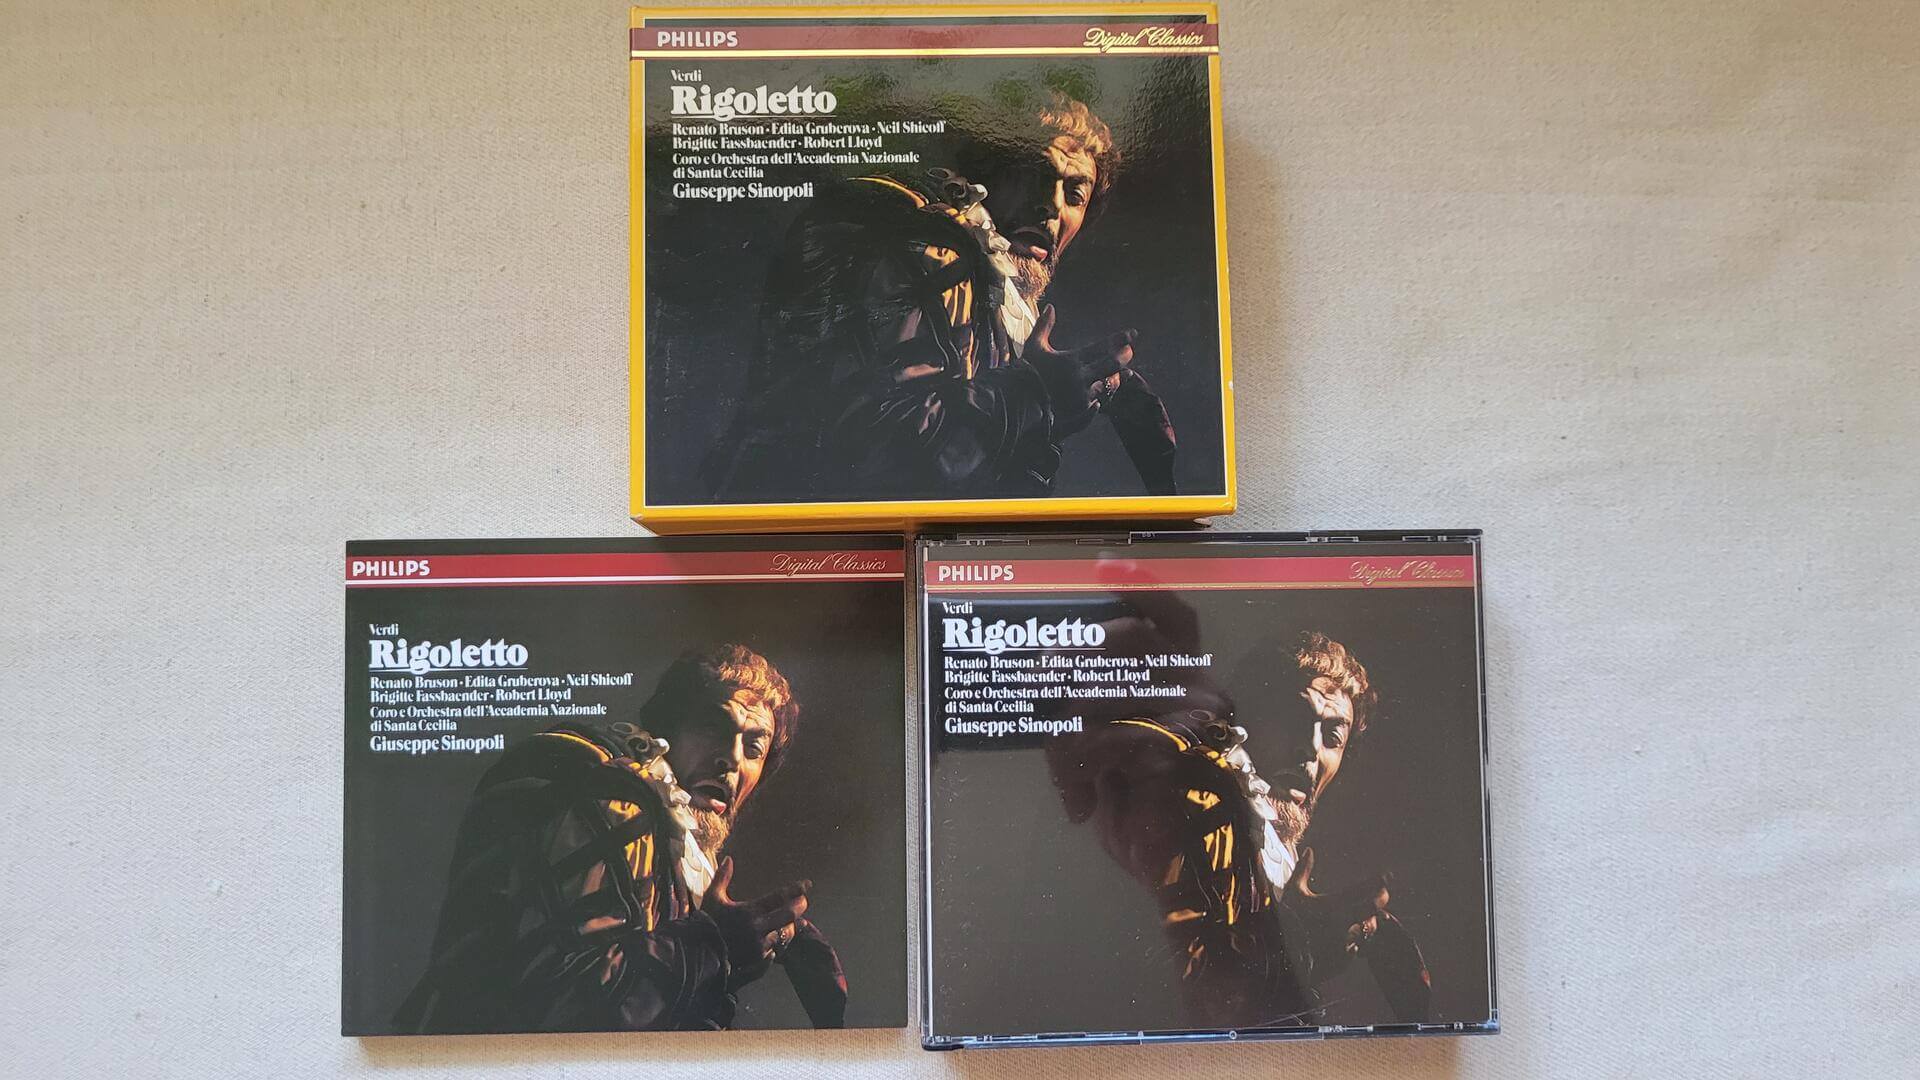 Philips Digital Classics Verdi Rigoletto 2CD Box Set Giuseppe Sinopoli - vintage collectible classical music cd set made in West Germany